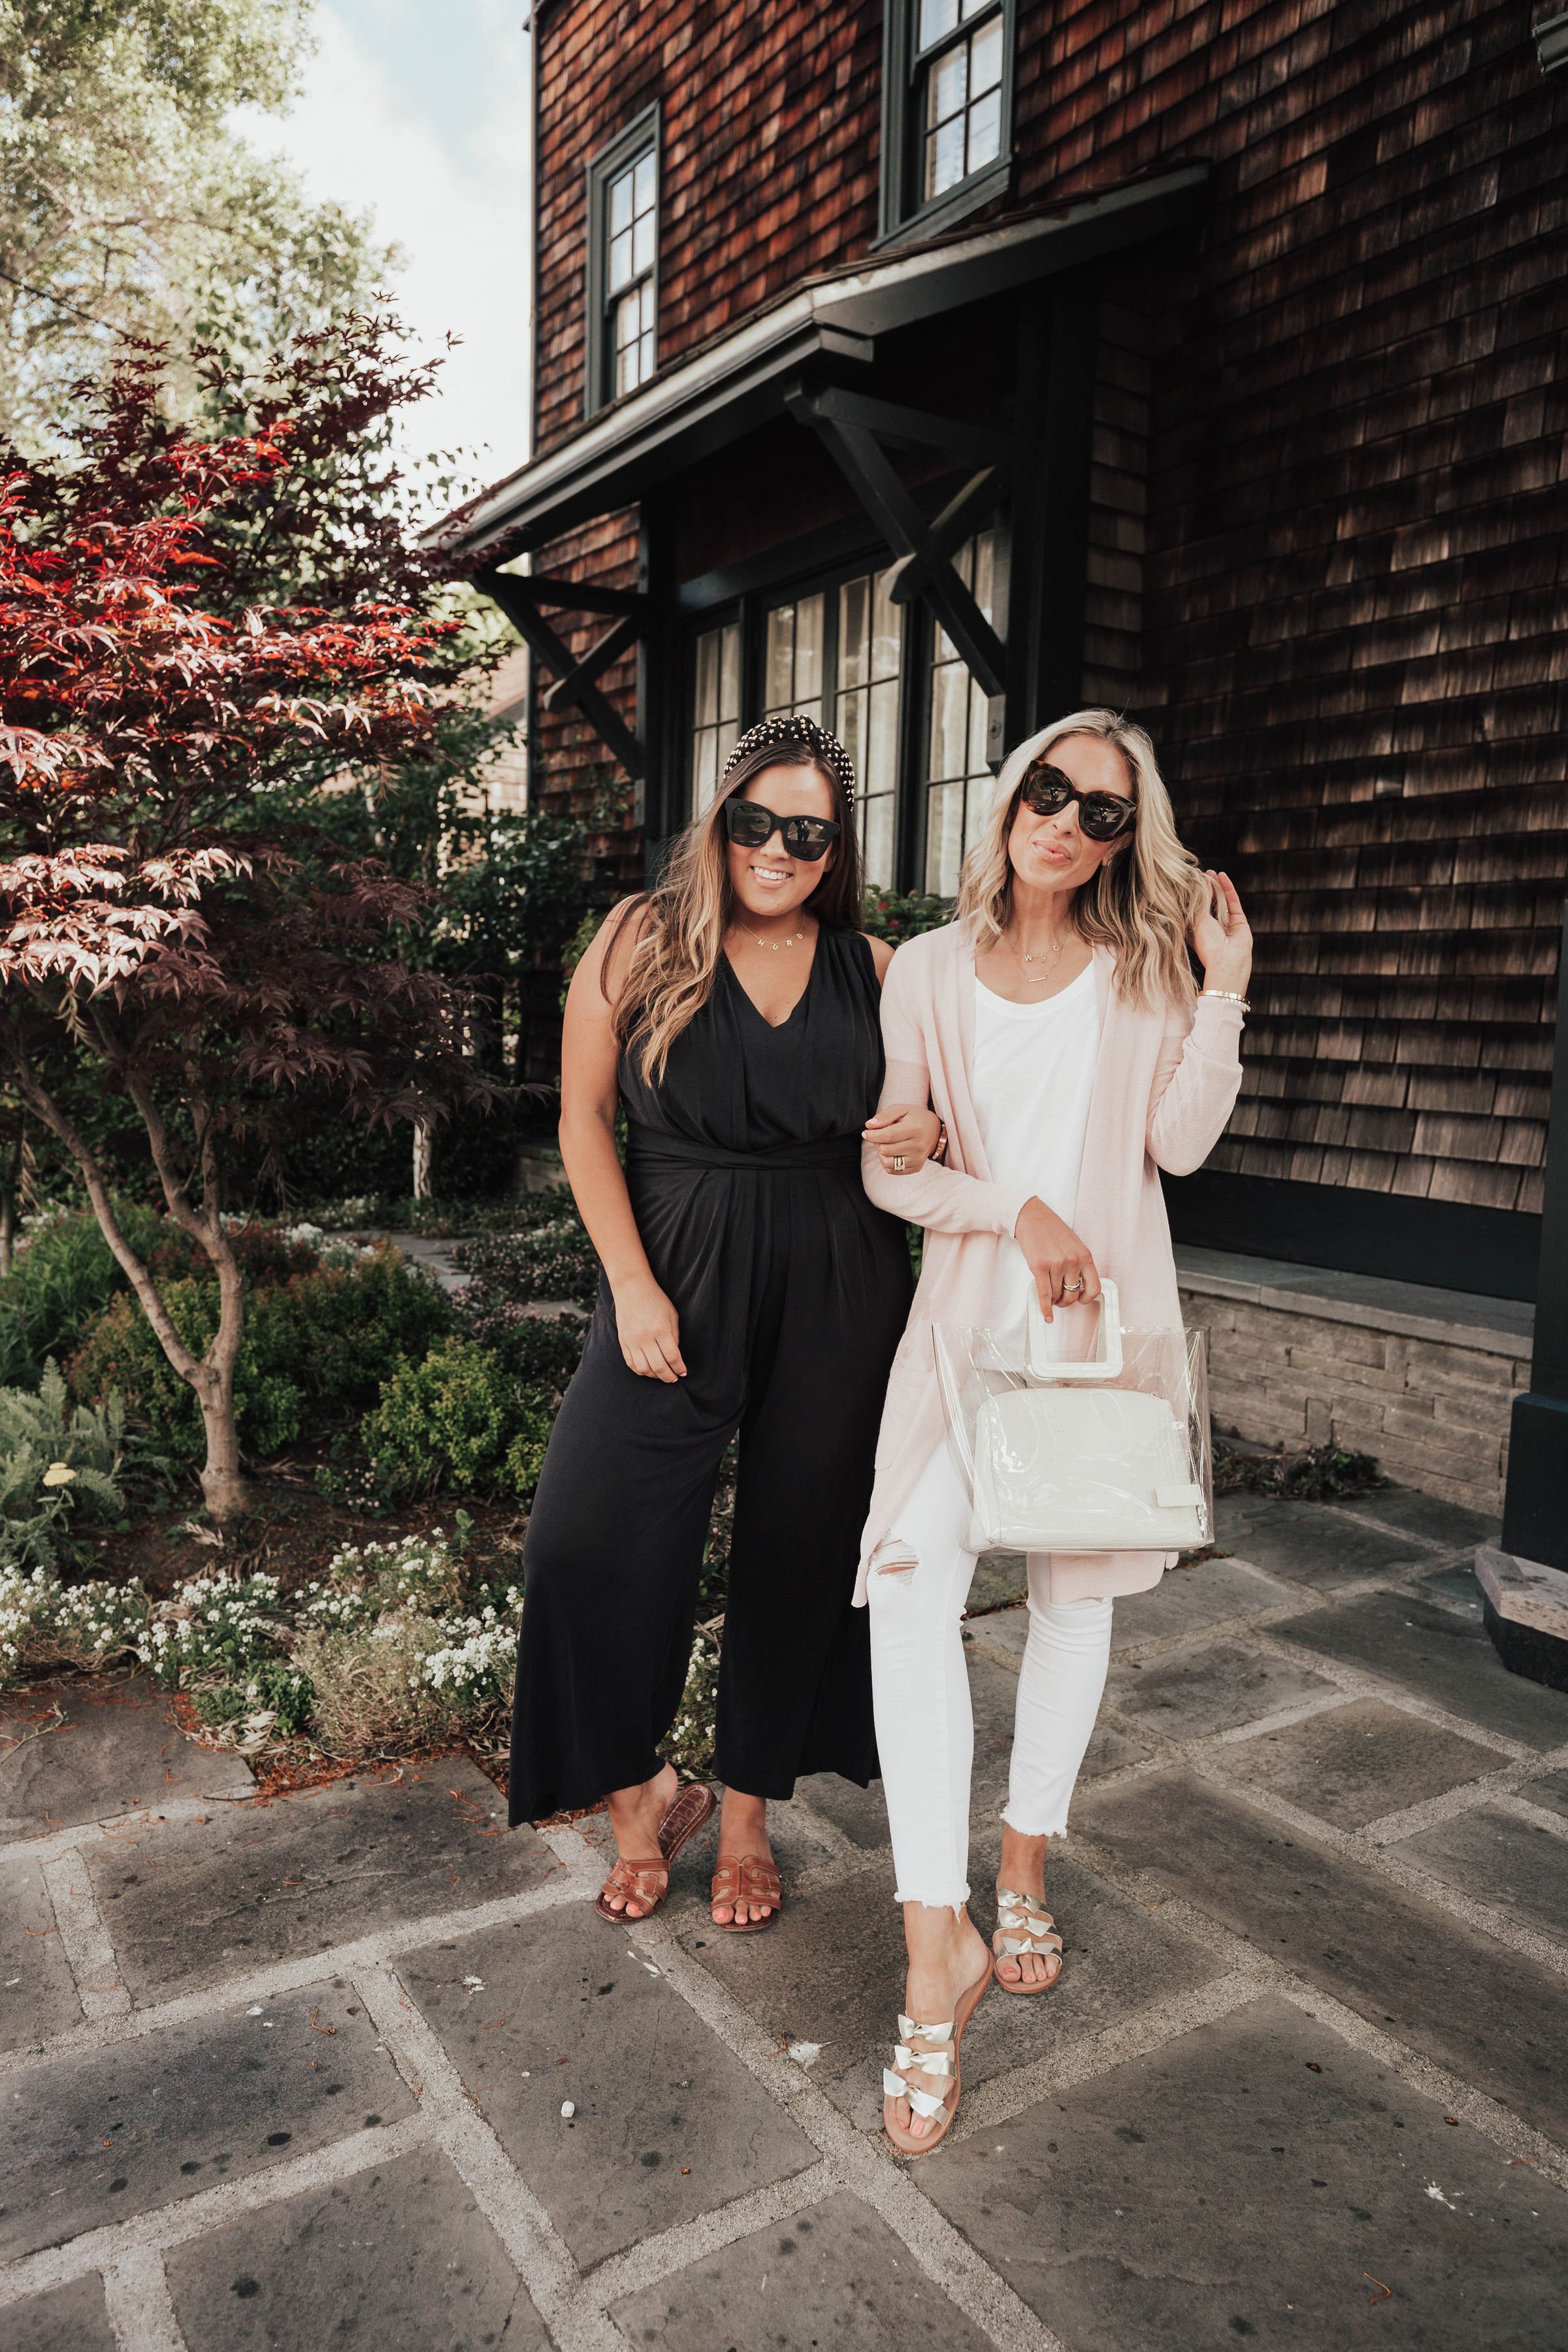 Bloggers Ashley Zeal and Emily Wieczorek from Two Peas in a Prada share their top ten trendy items for summer from Nordstrom.